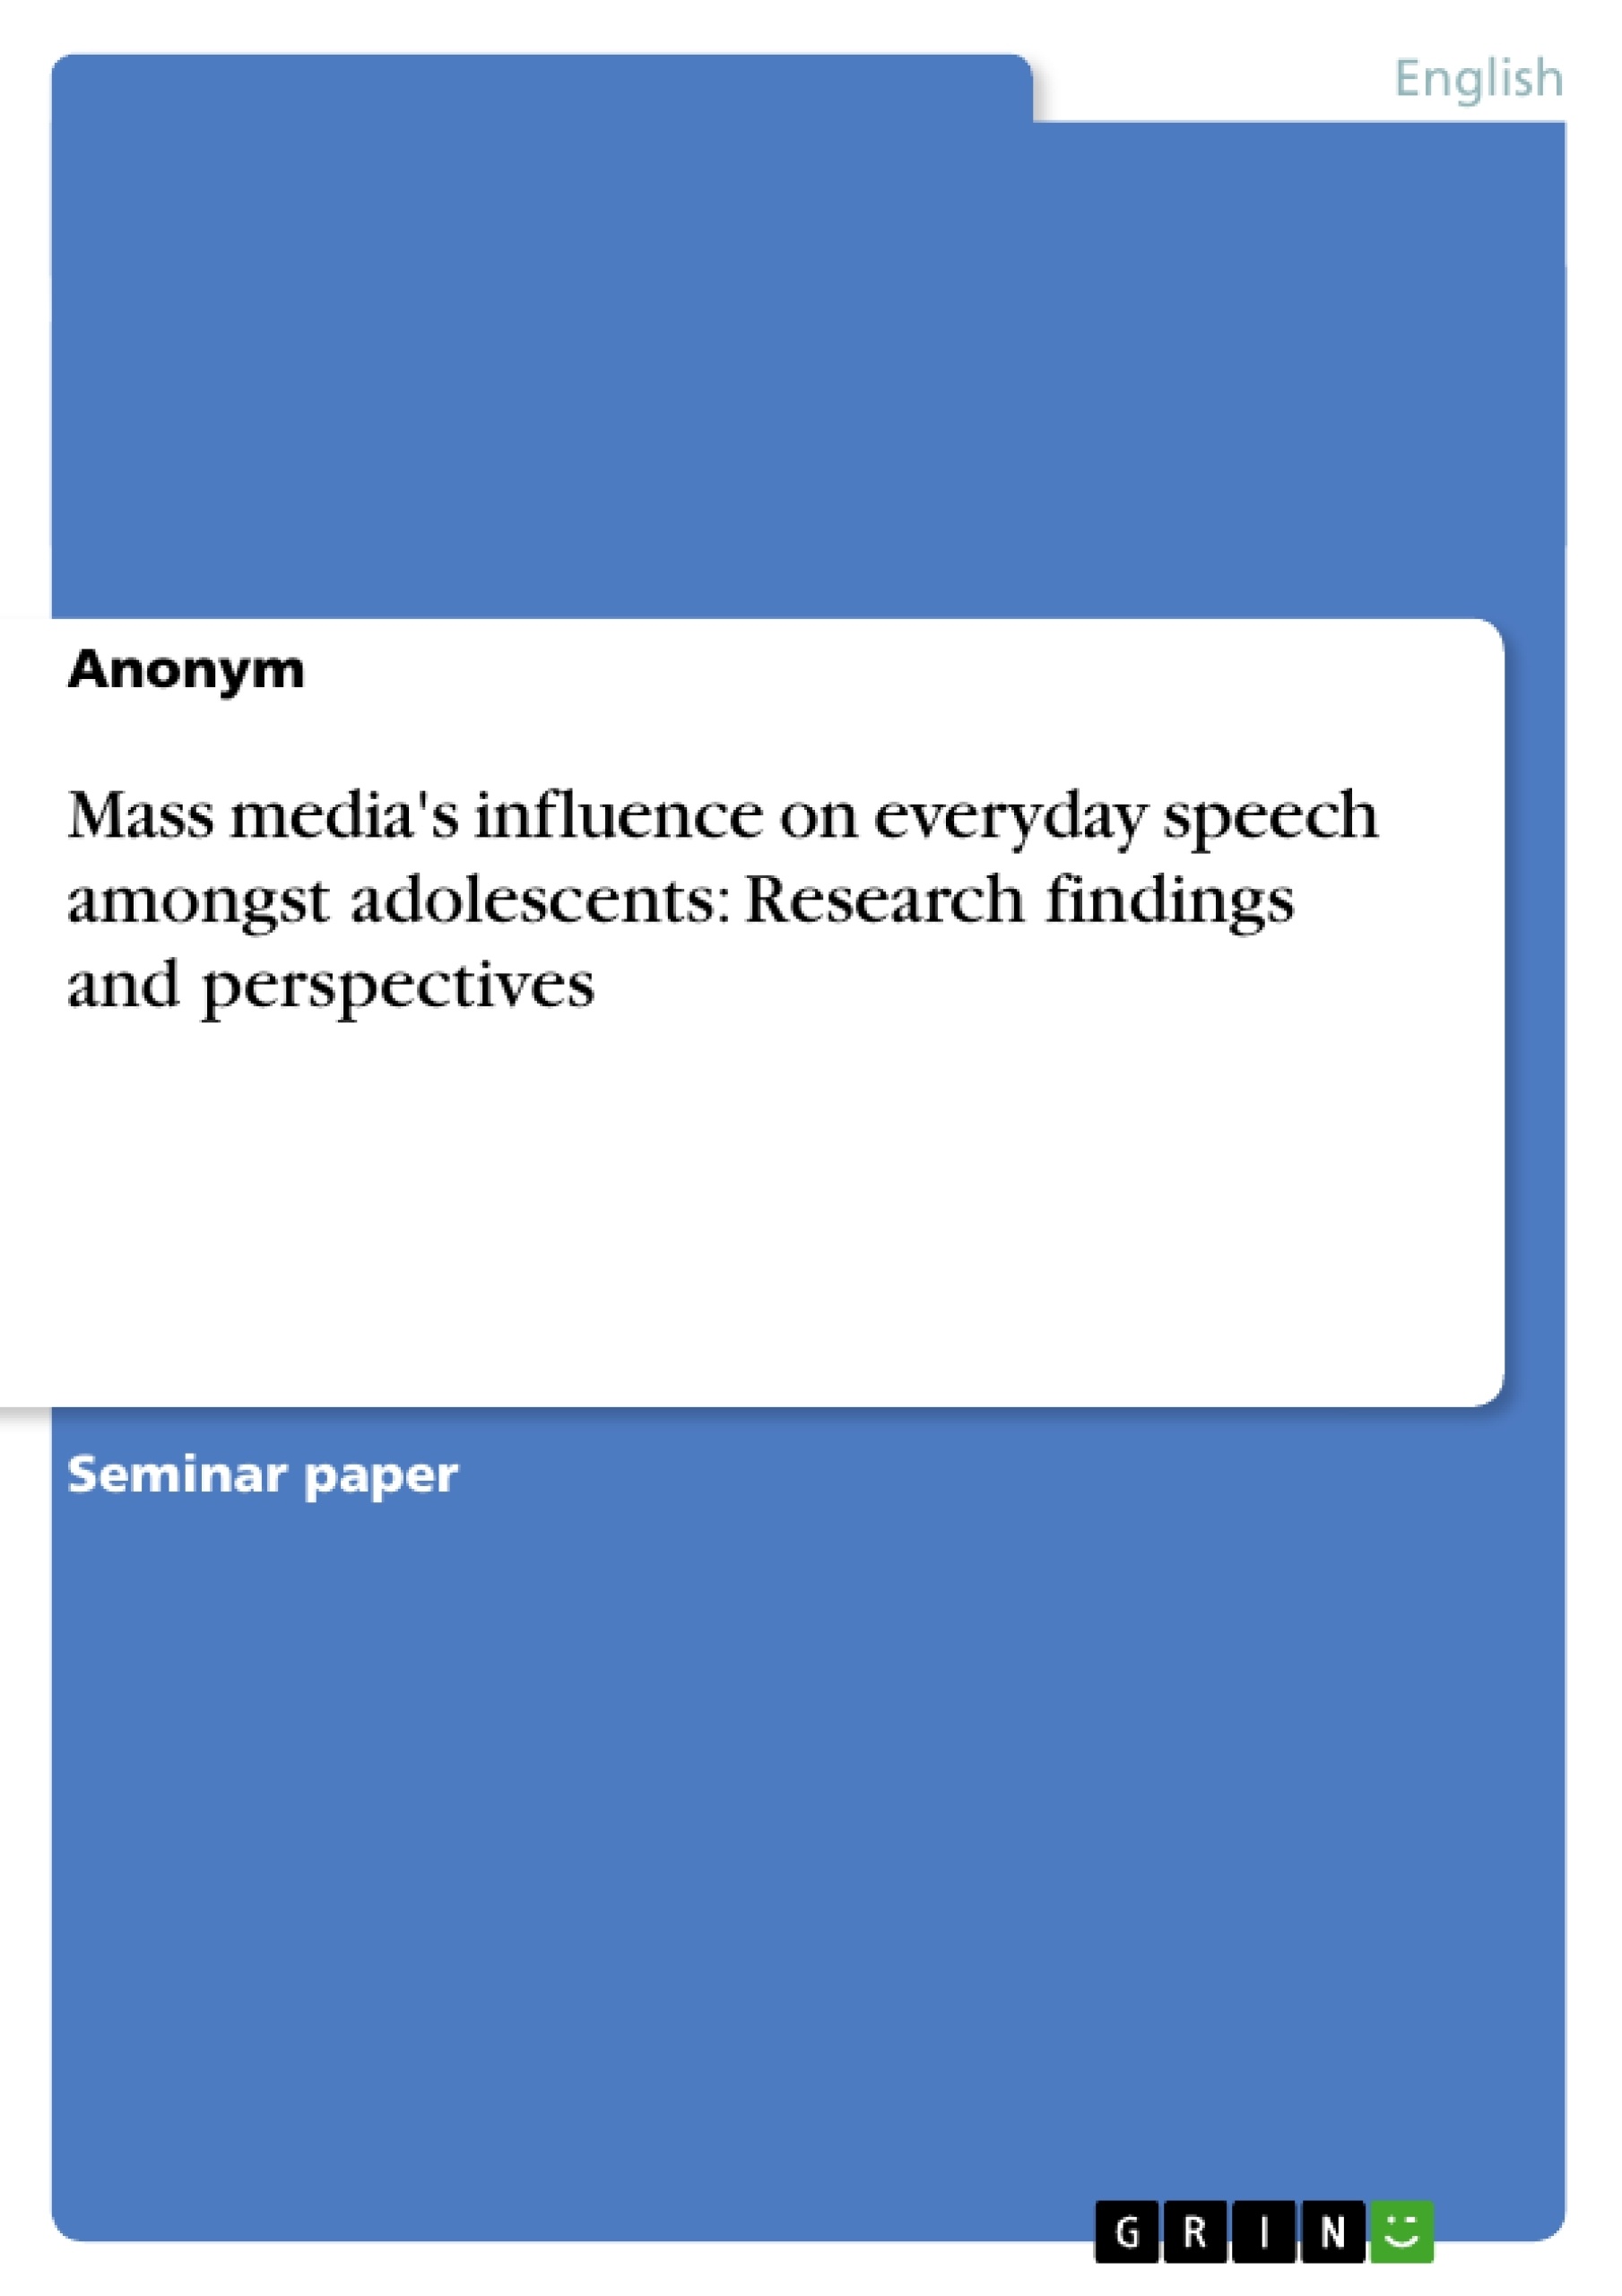 Title: Mass media's influence on everyday speech amongst adolescents: Research findings and perspectives